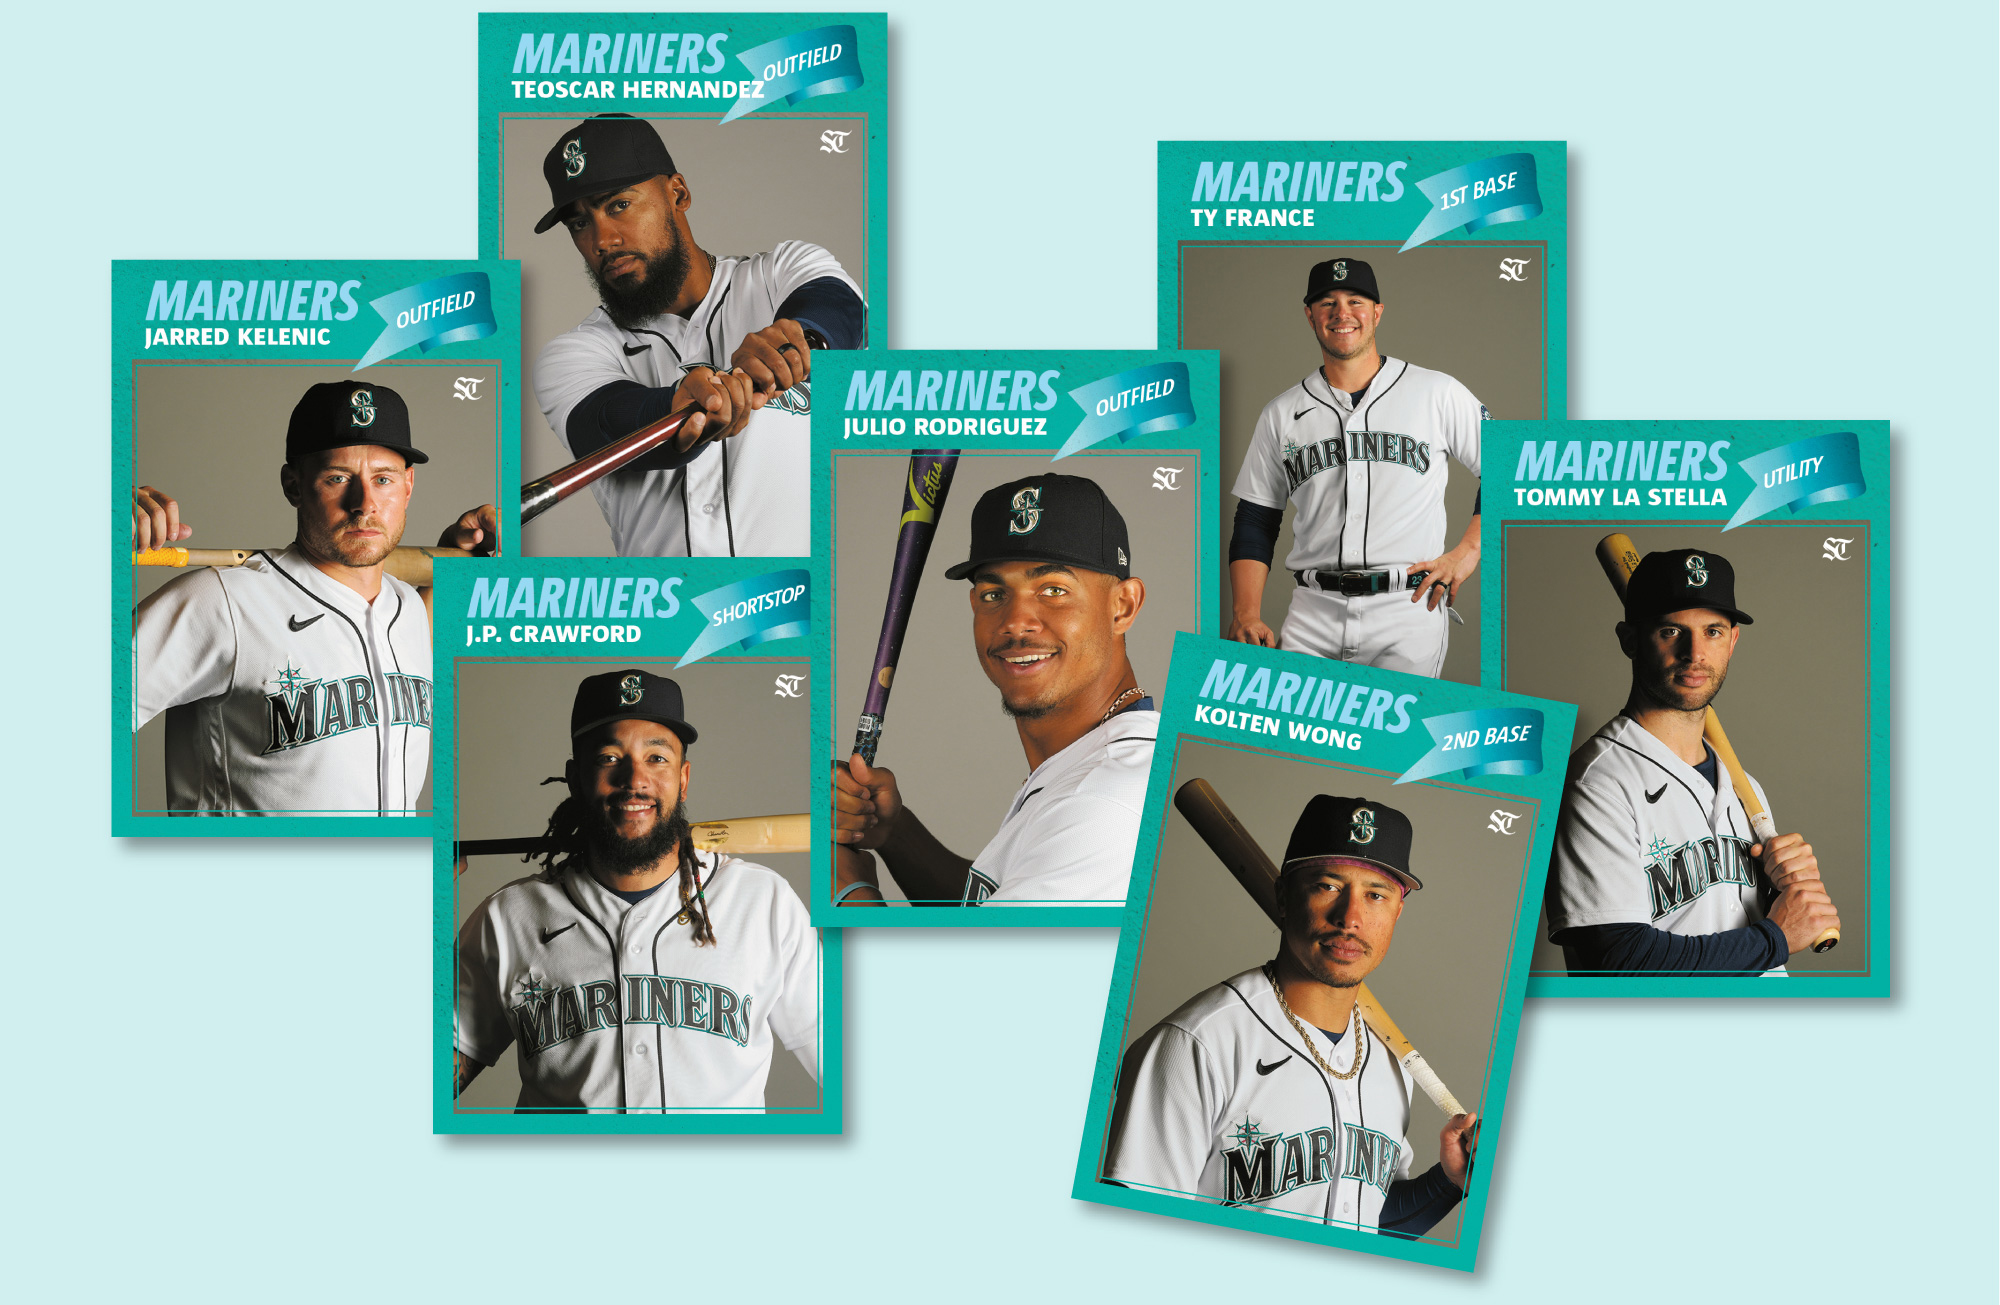 Create your own Mariners lineup